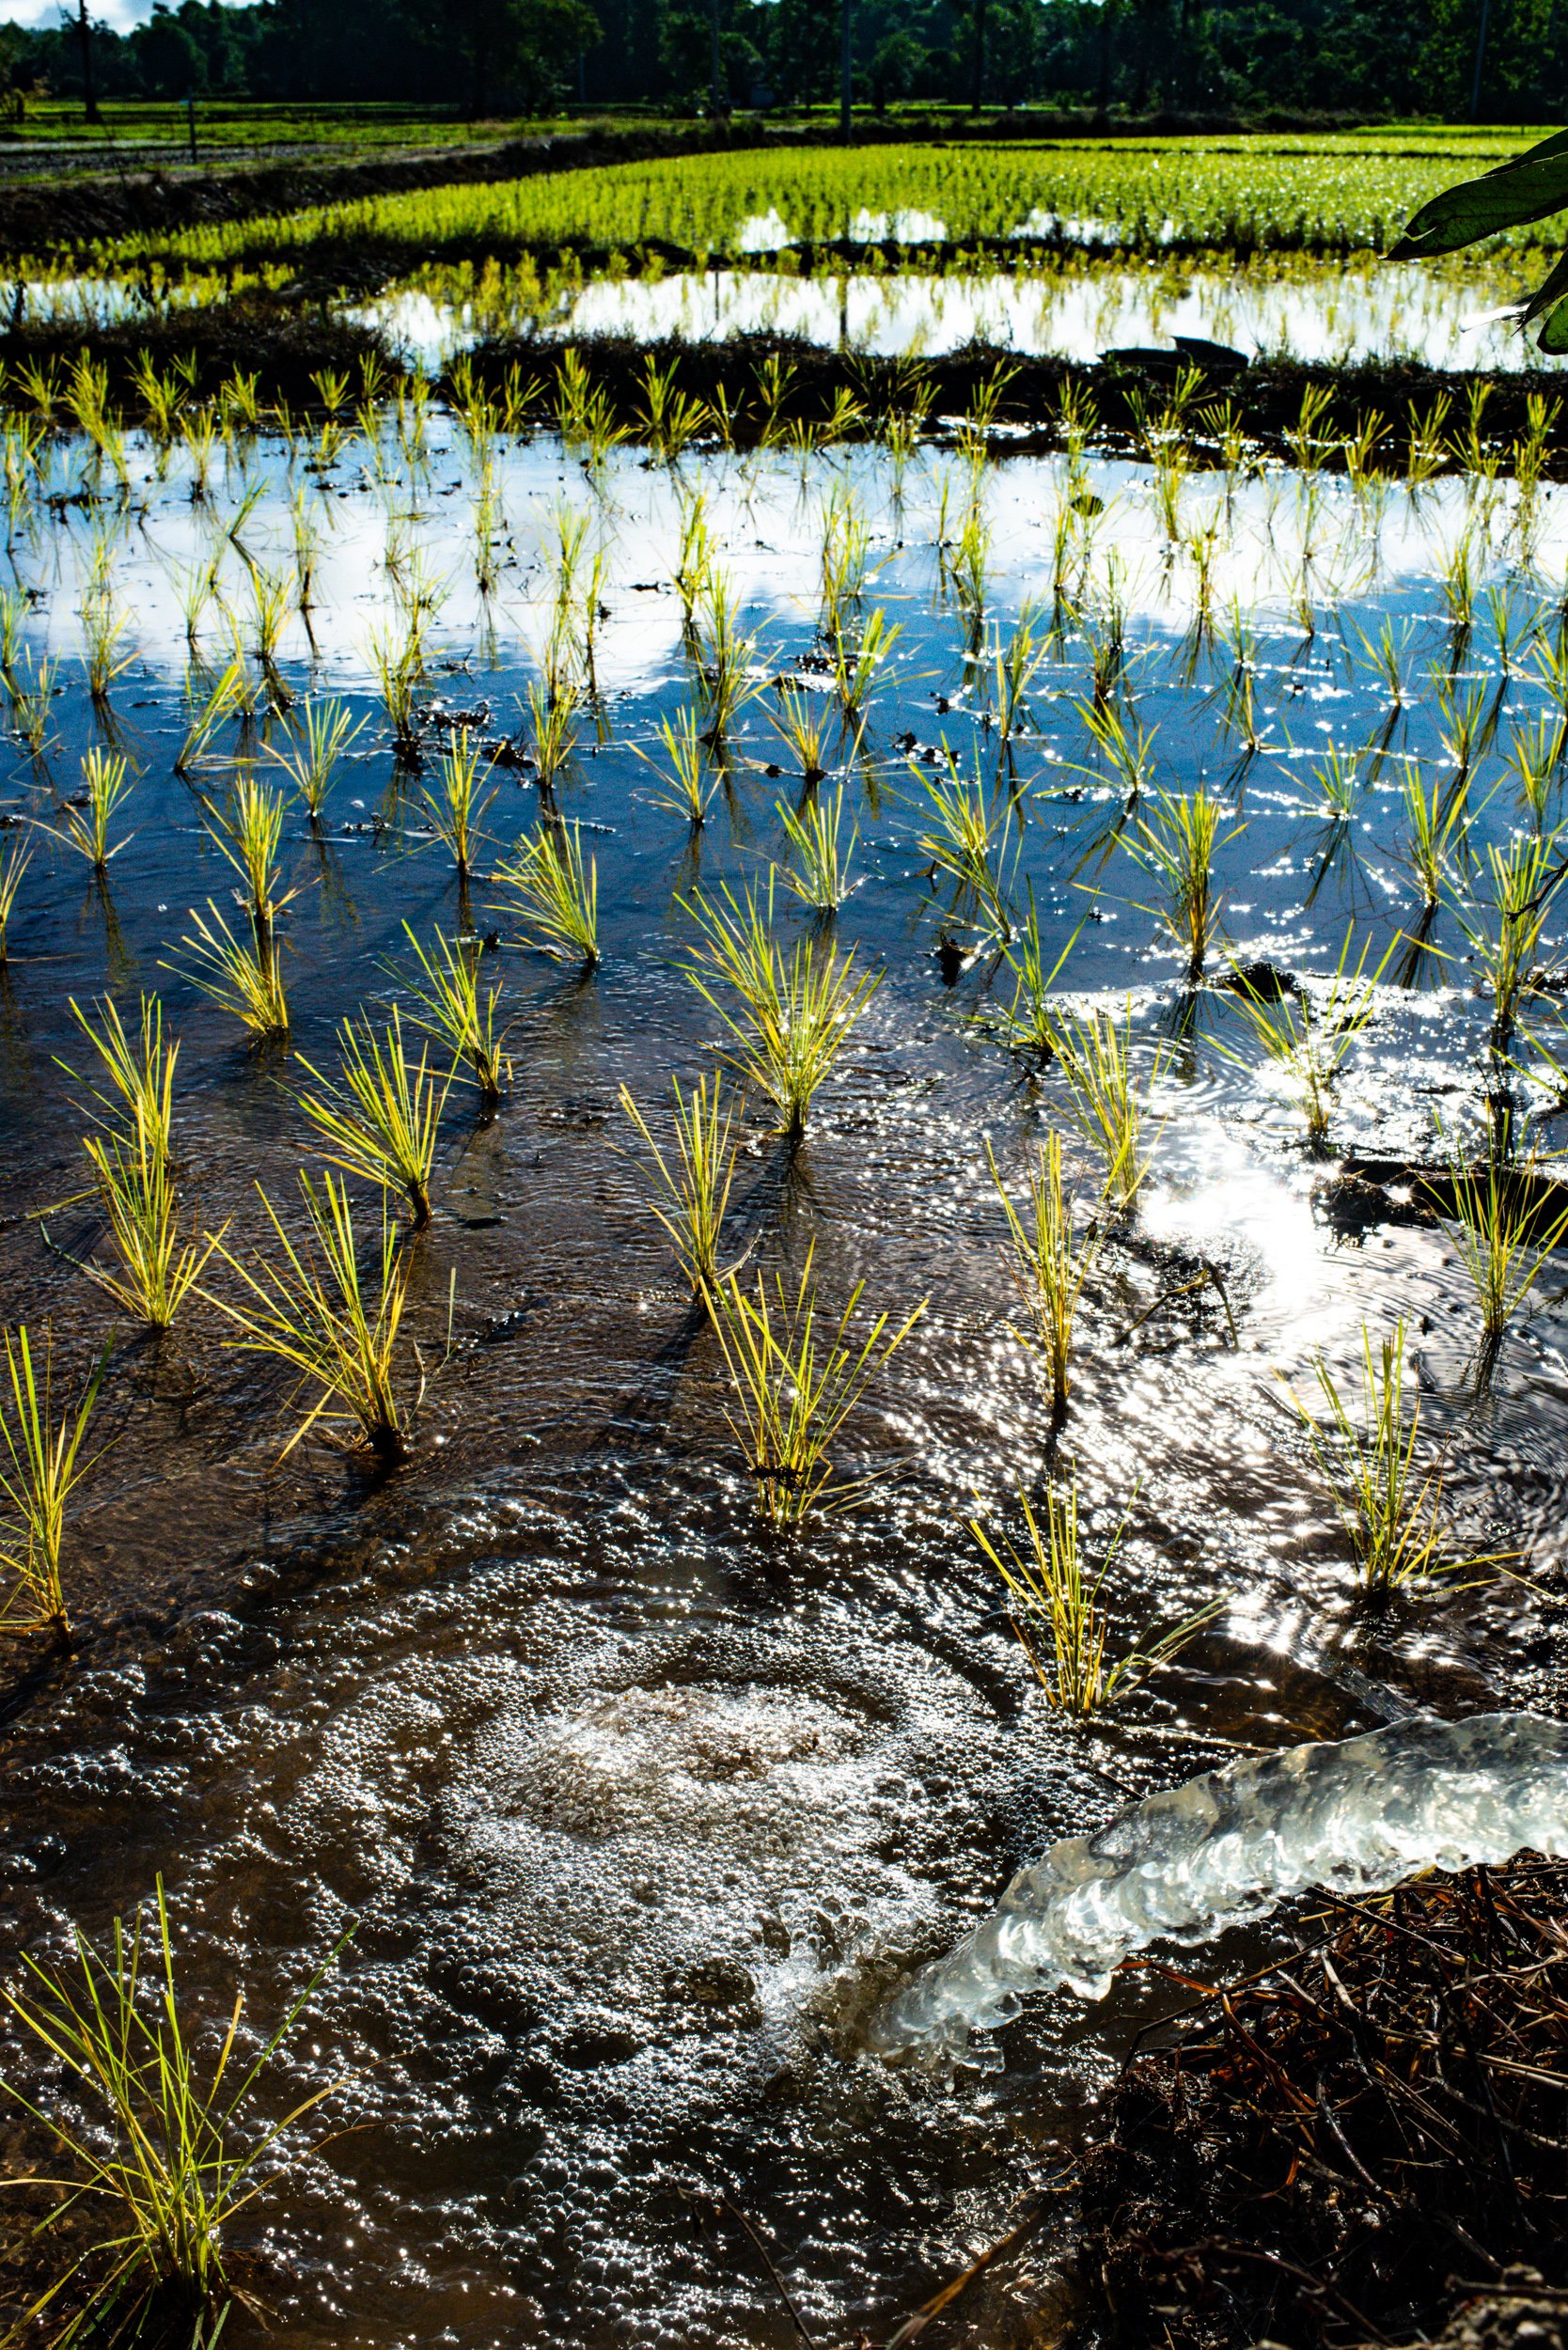 water feeding into a rice field in hard light on a sunny day